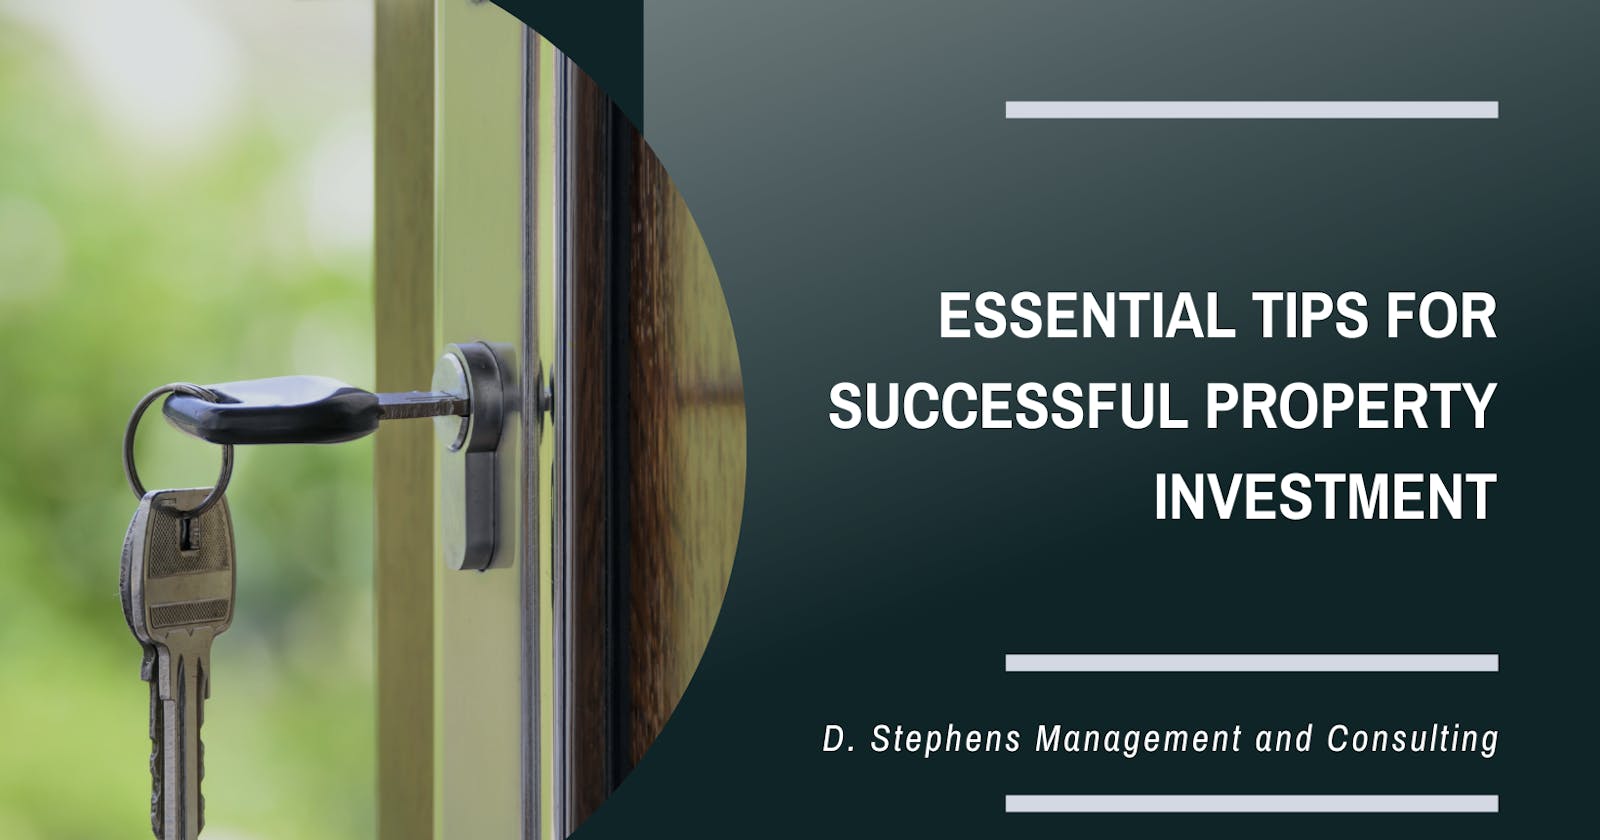 D. Stephens Management and Consulting | Essential Tips for Successful Property Investment